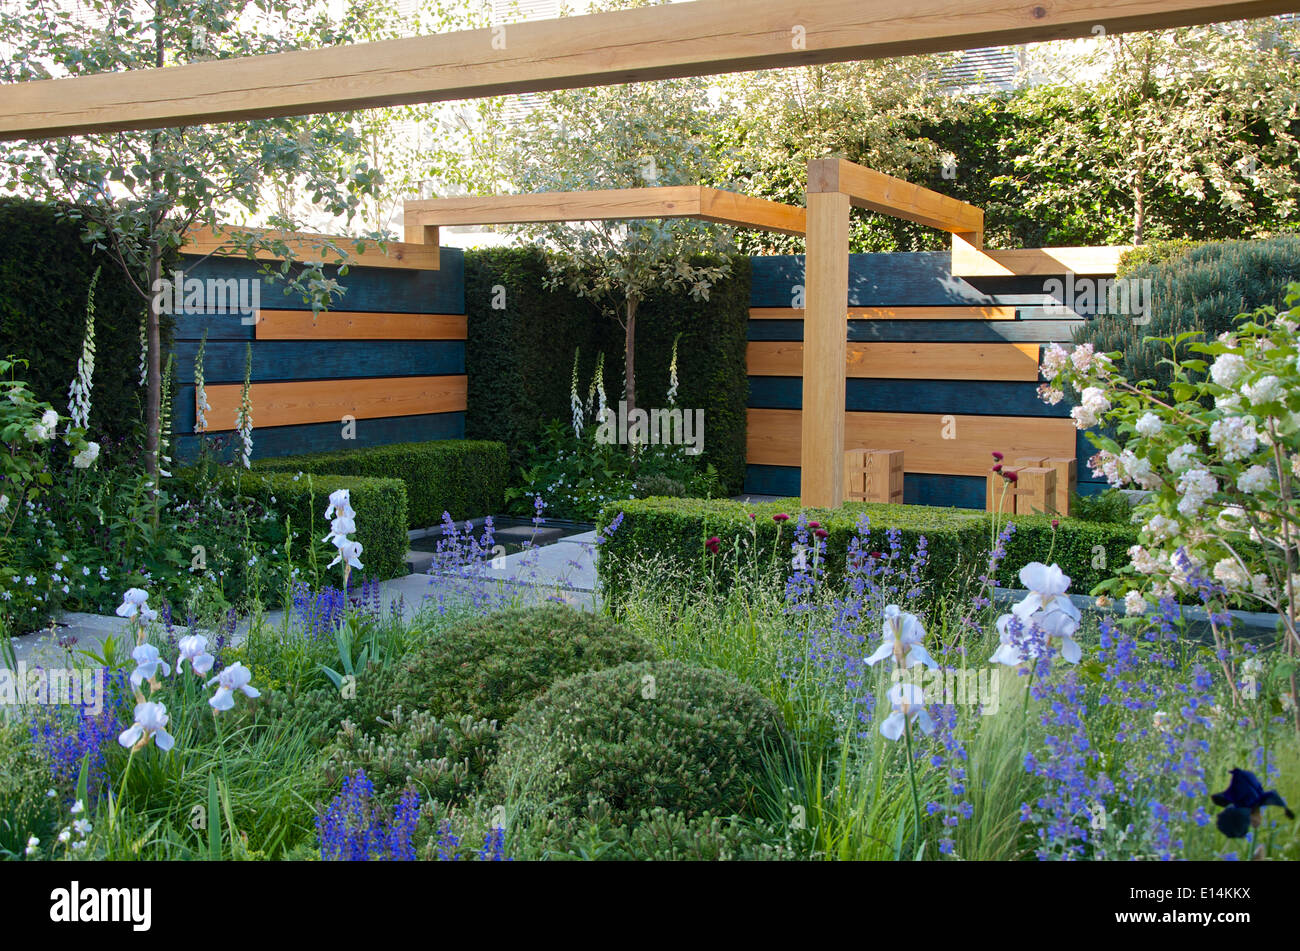 The Extending Space Garden at RHS Chelsea Flower Show 2014 designed by Nicole Fischer and Daniel Auderset Stock Photo